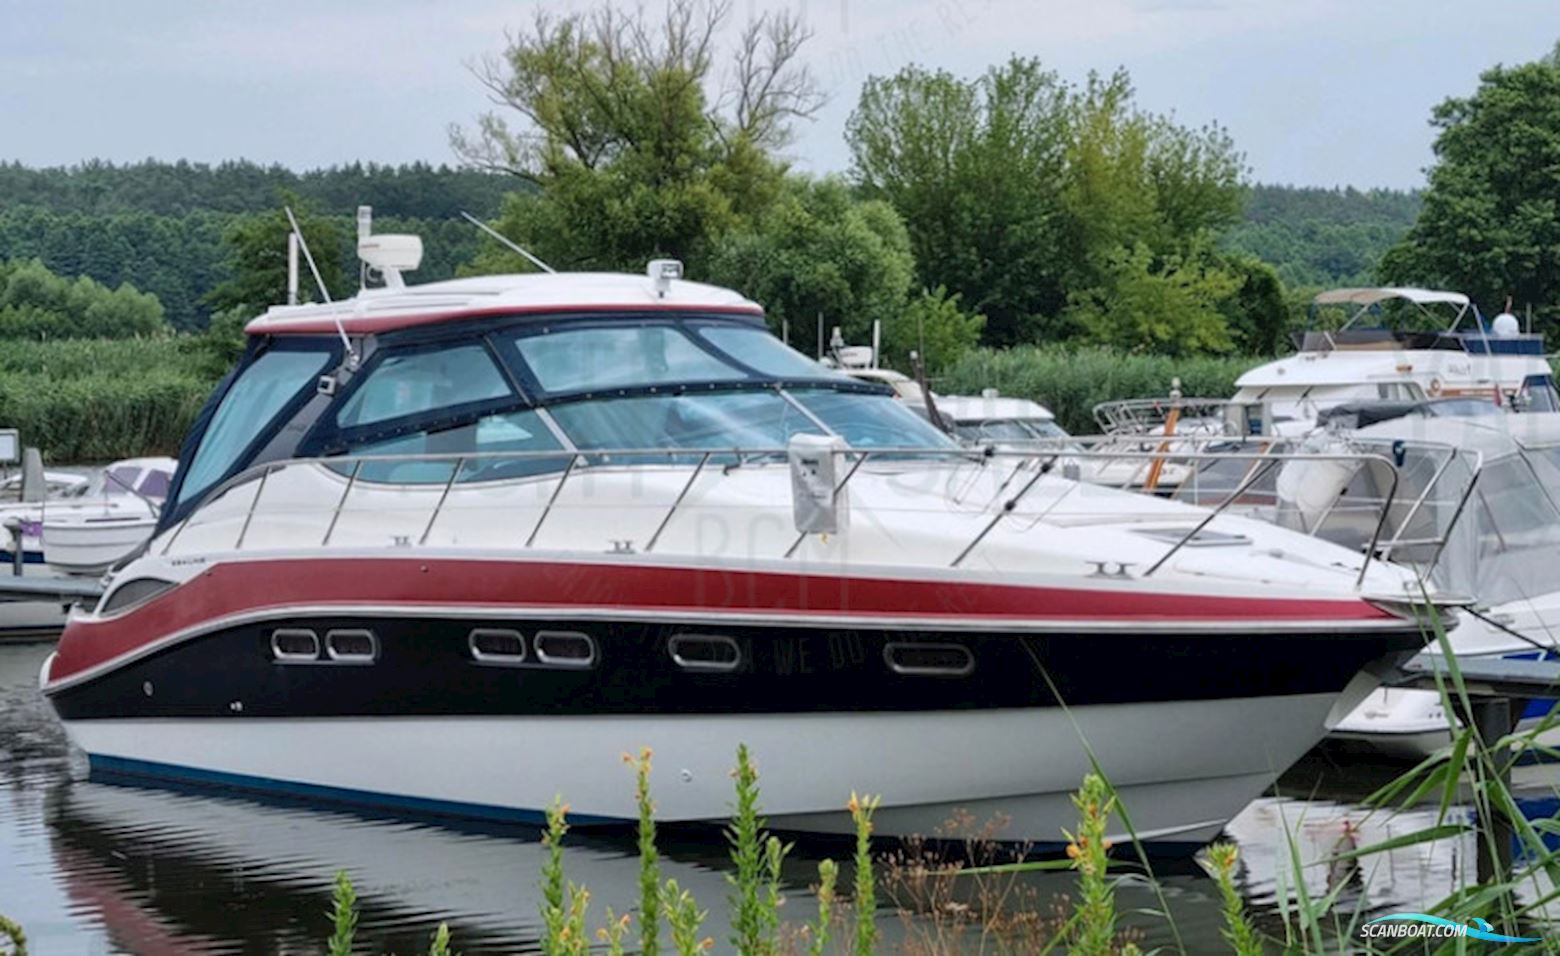 Sealine S 42 HT Motor boat 2005, with Volvo Penta D6 350 engine, Germany